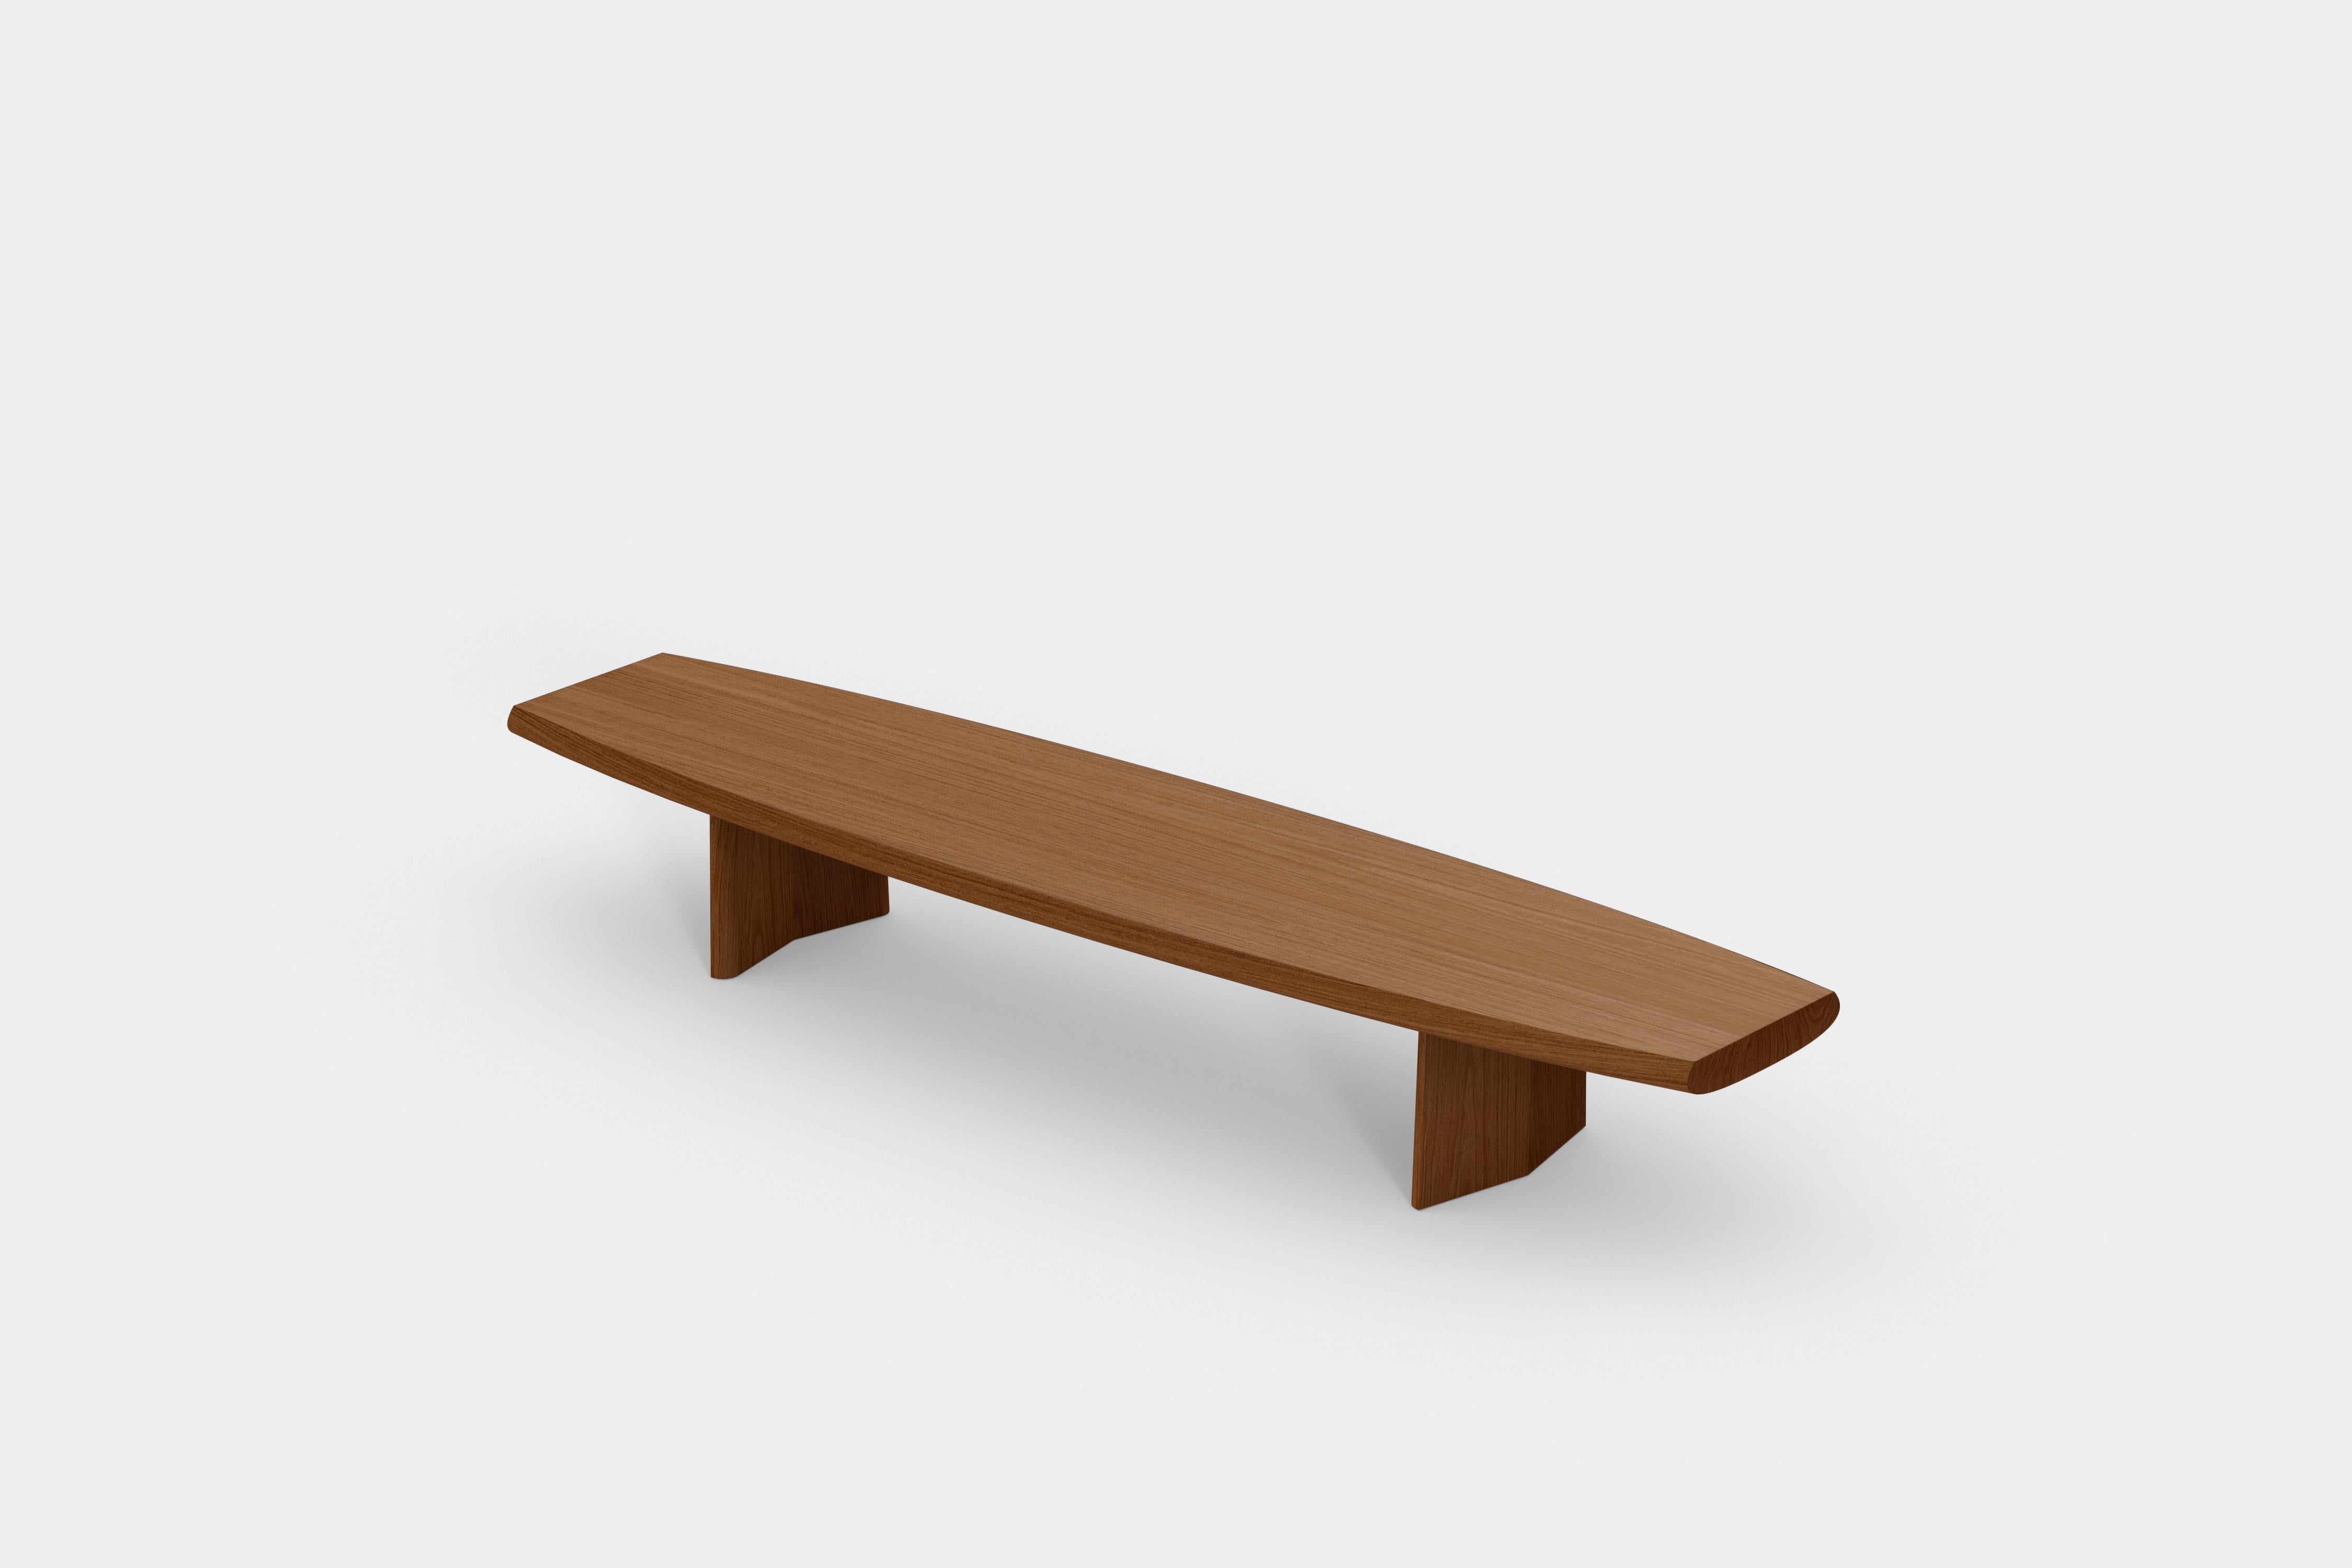 Oak Set of Two Peana Coffee Tables, Bench in Red Tinted Wood Finish by Joel Escalona For Sale